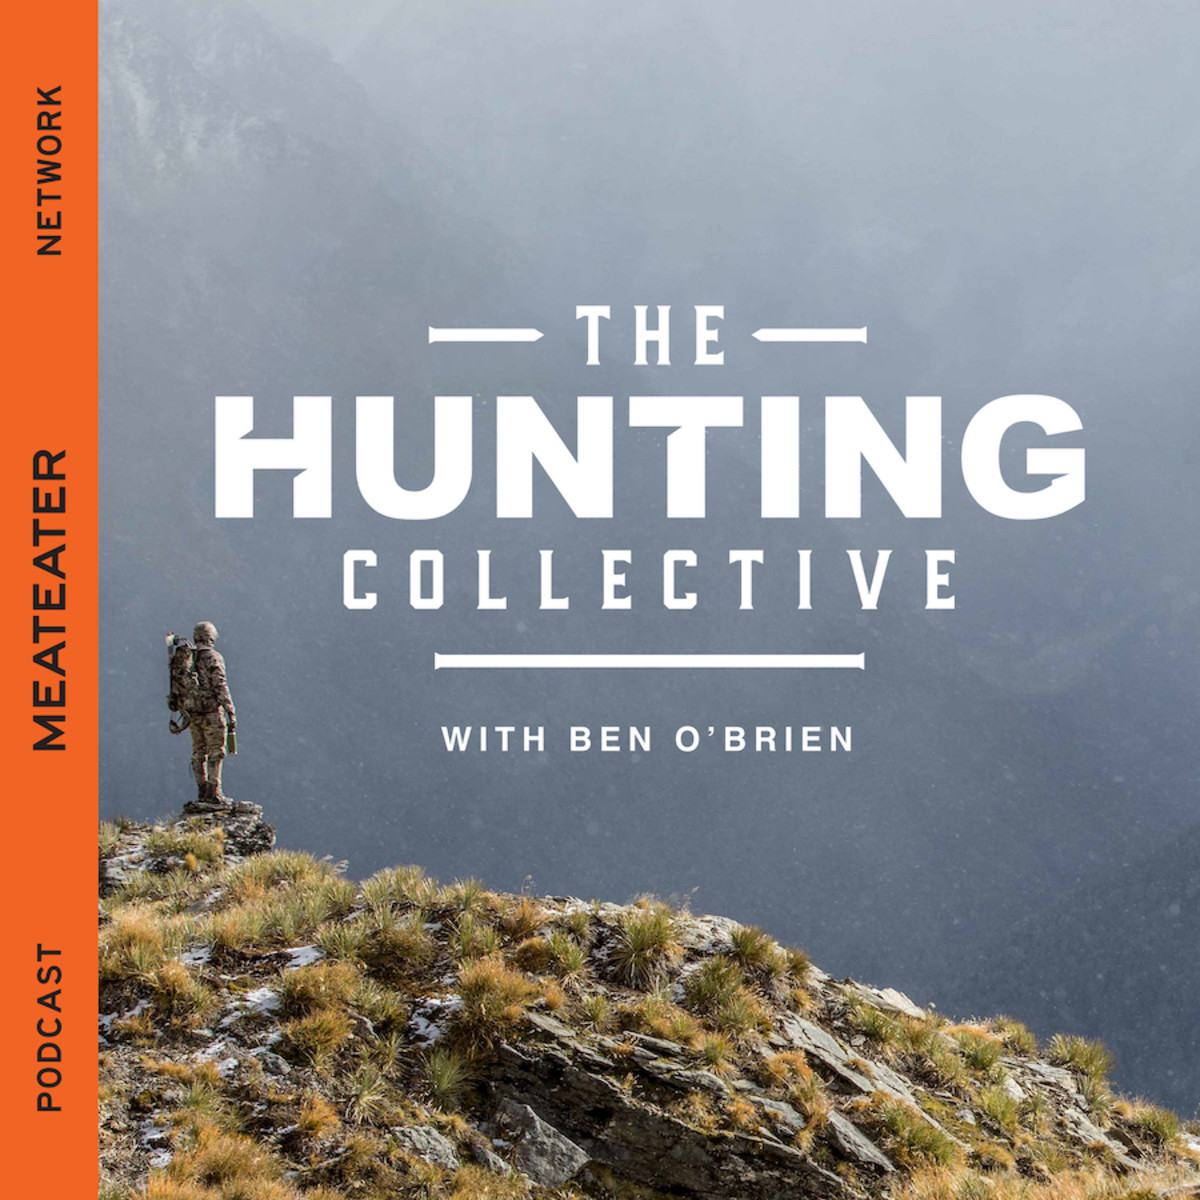 Ep. 74: Remi’s New Podcast, We Read Mean Comments & the History of the Boone & Crockett Club